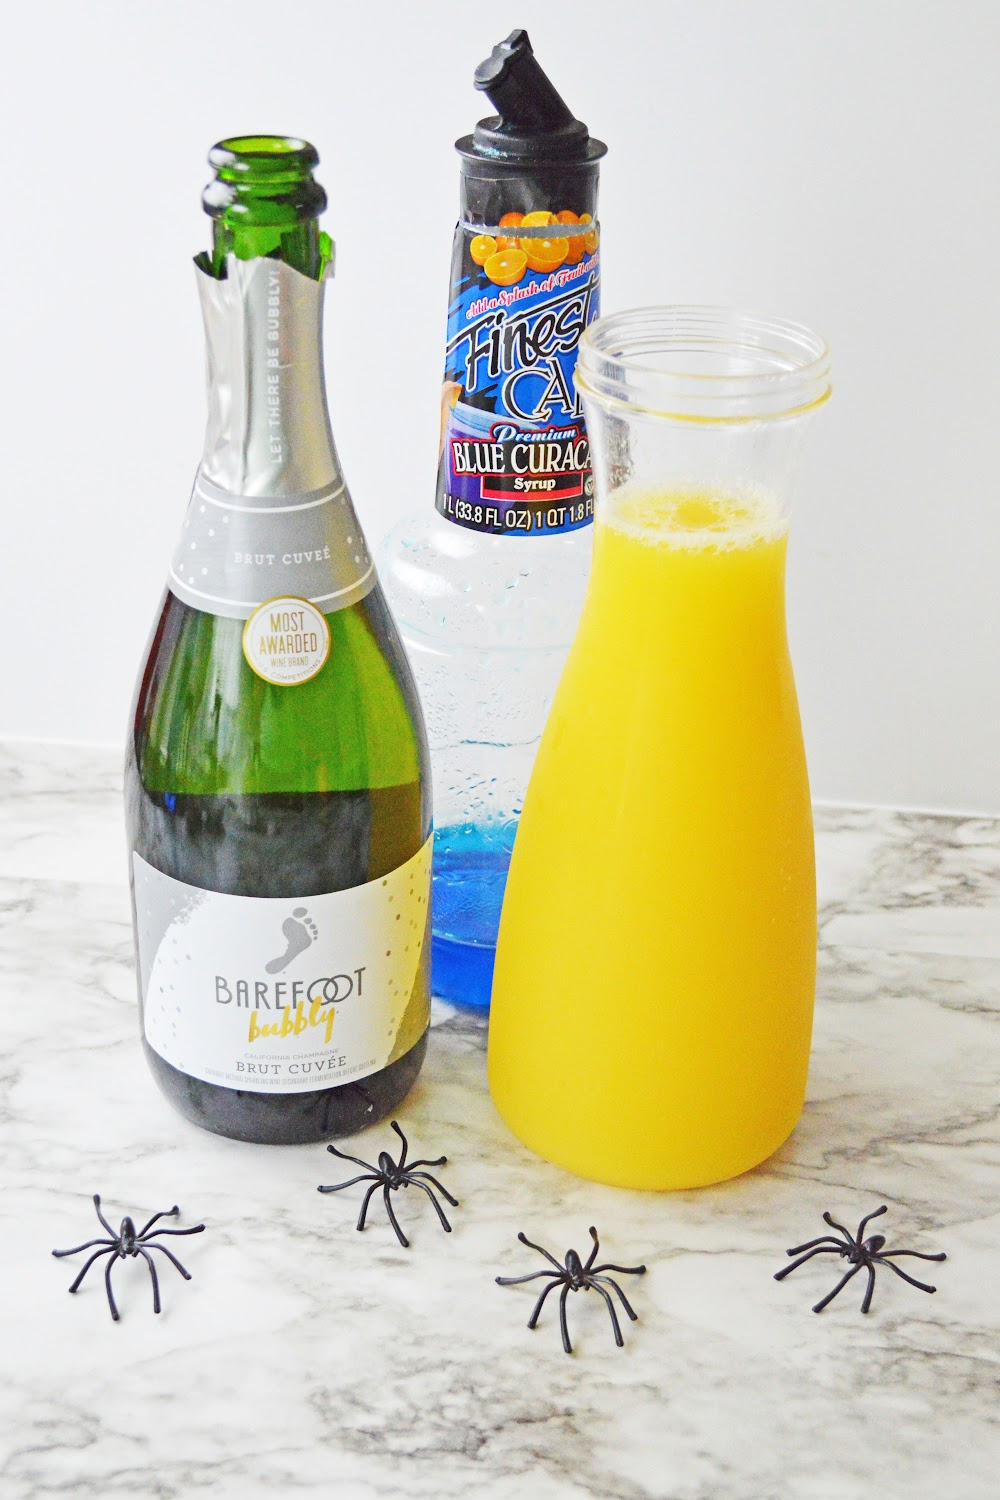 Halloween Mimosas ingredients include champagne, orange juice and blue Curacao. These ingredients are displayed on a gray and white marble background with black plastic spiders.